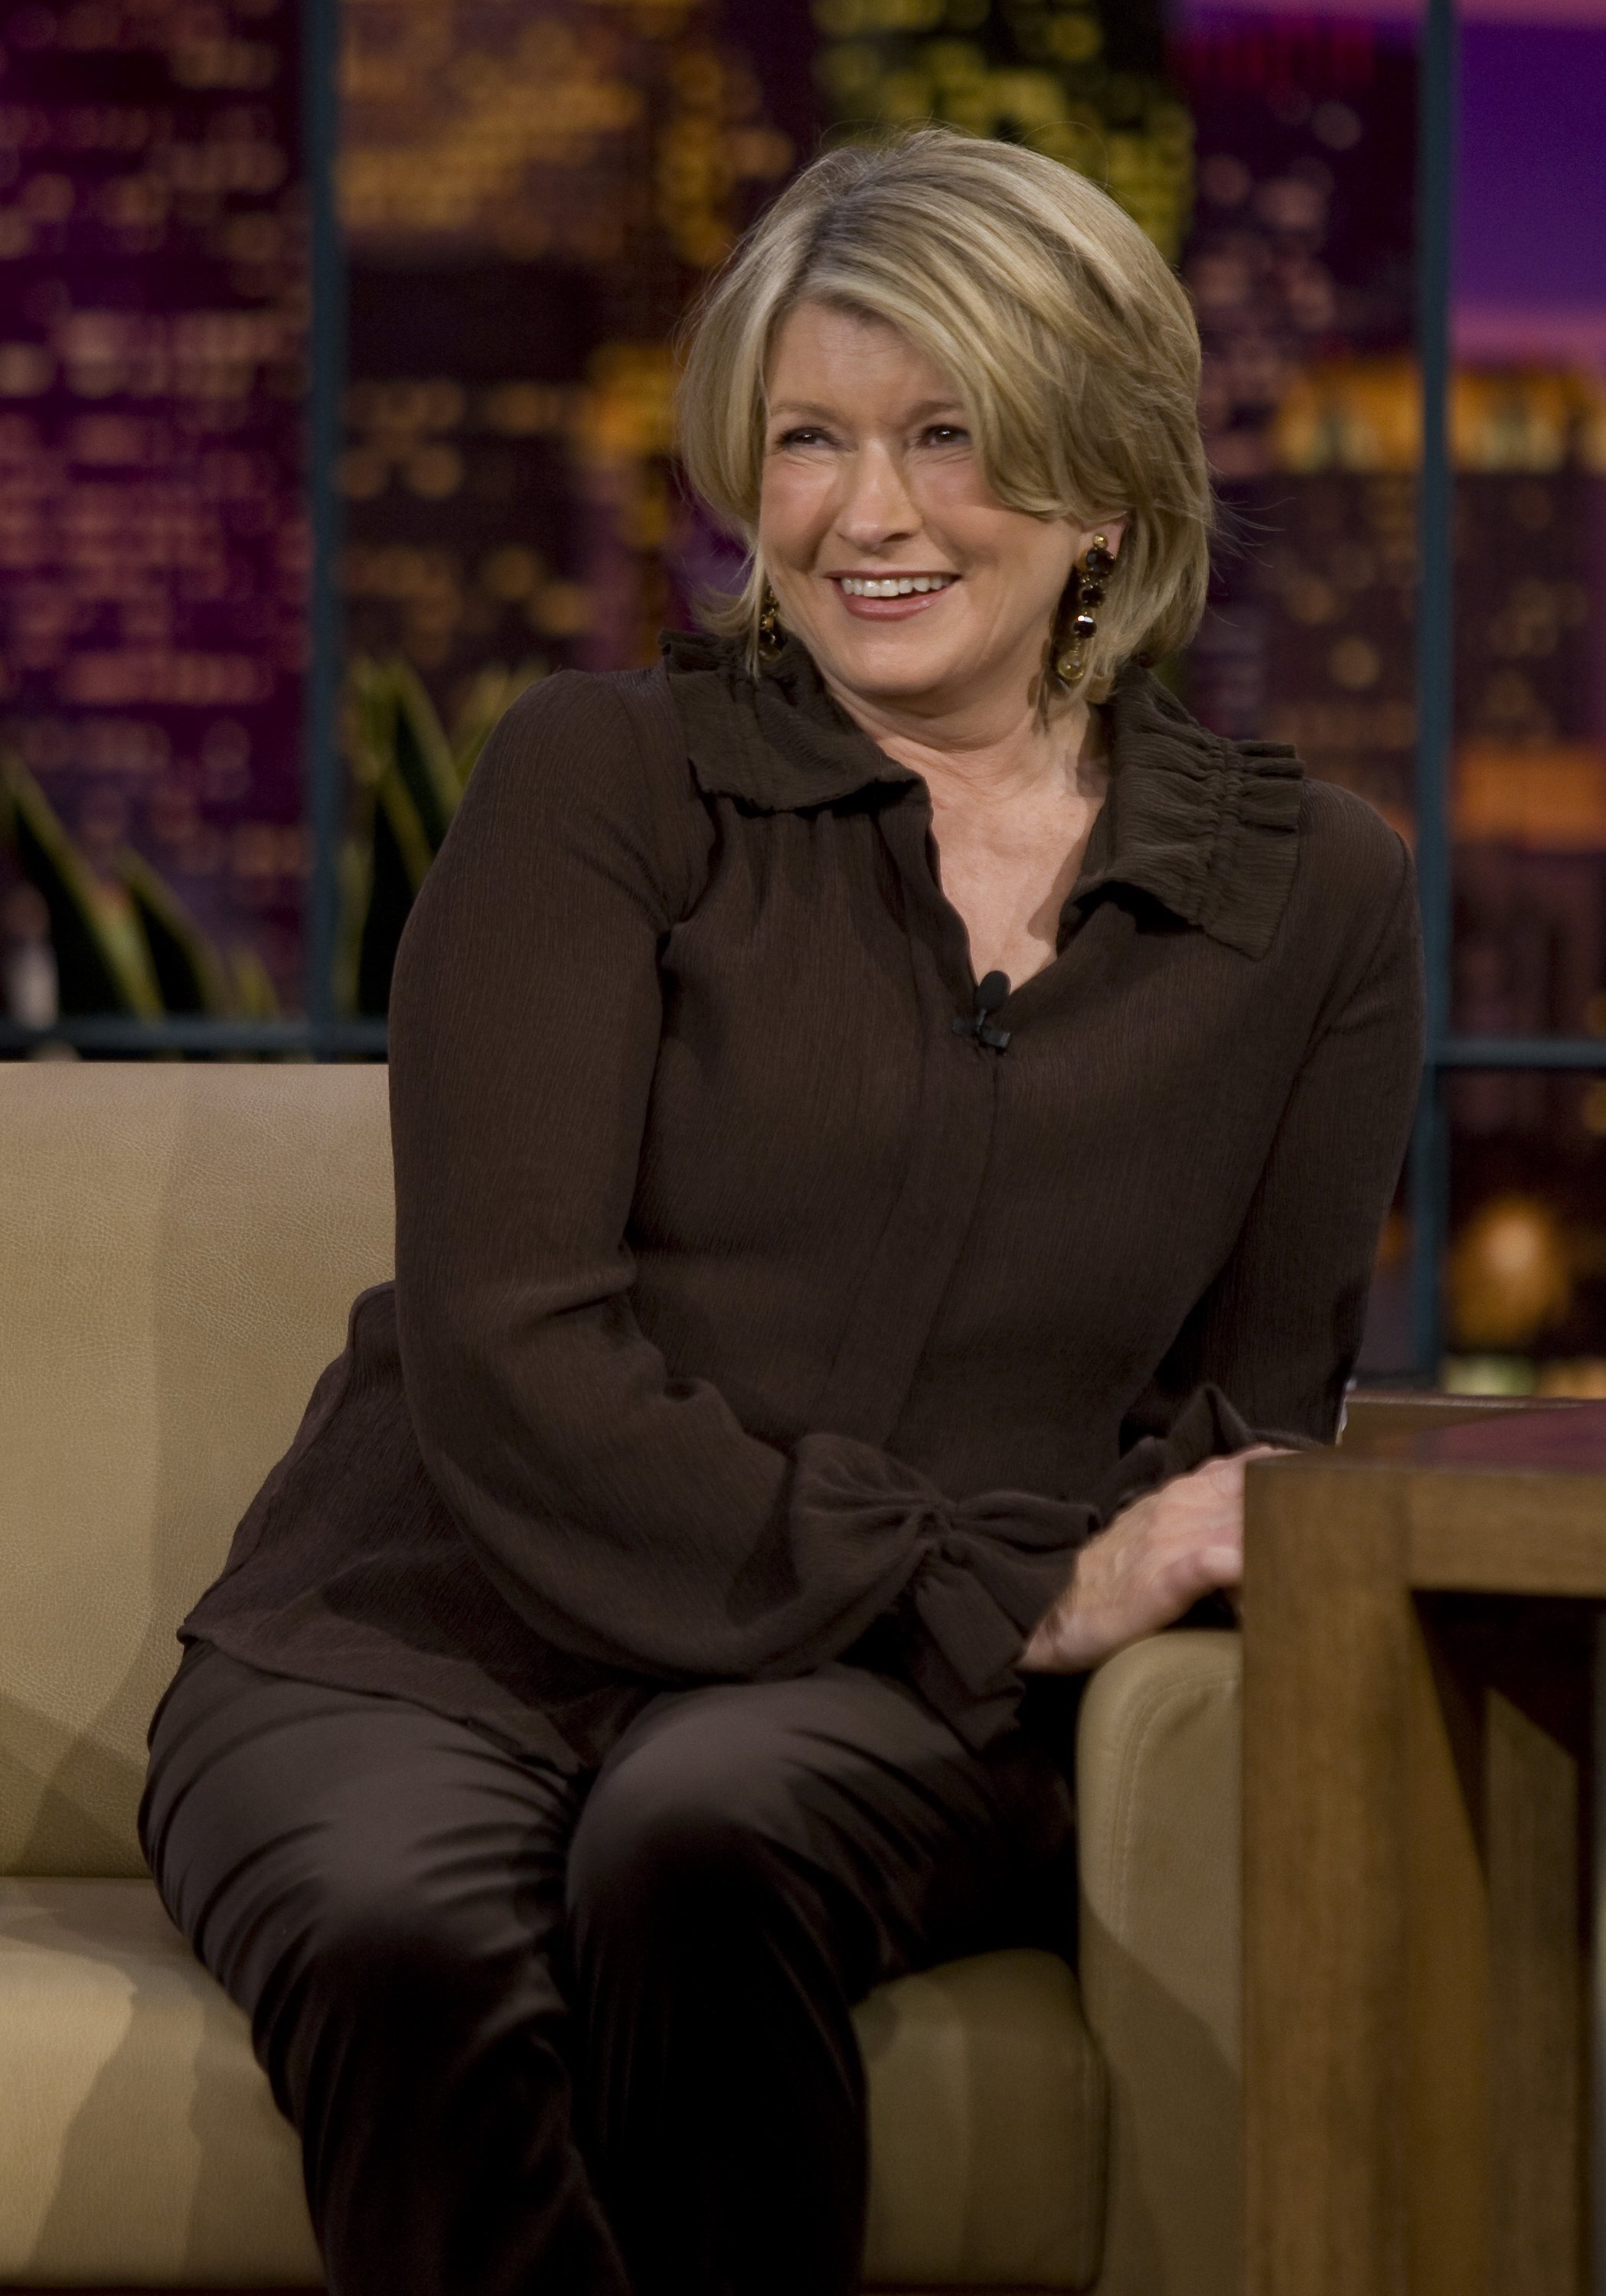 Martha Stewart during an interview on "The Tonight Show" with Jay Leno on November 10, 2007. | Source: Getty Images